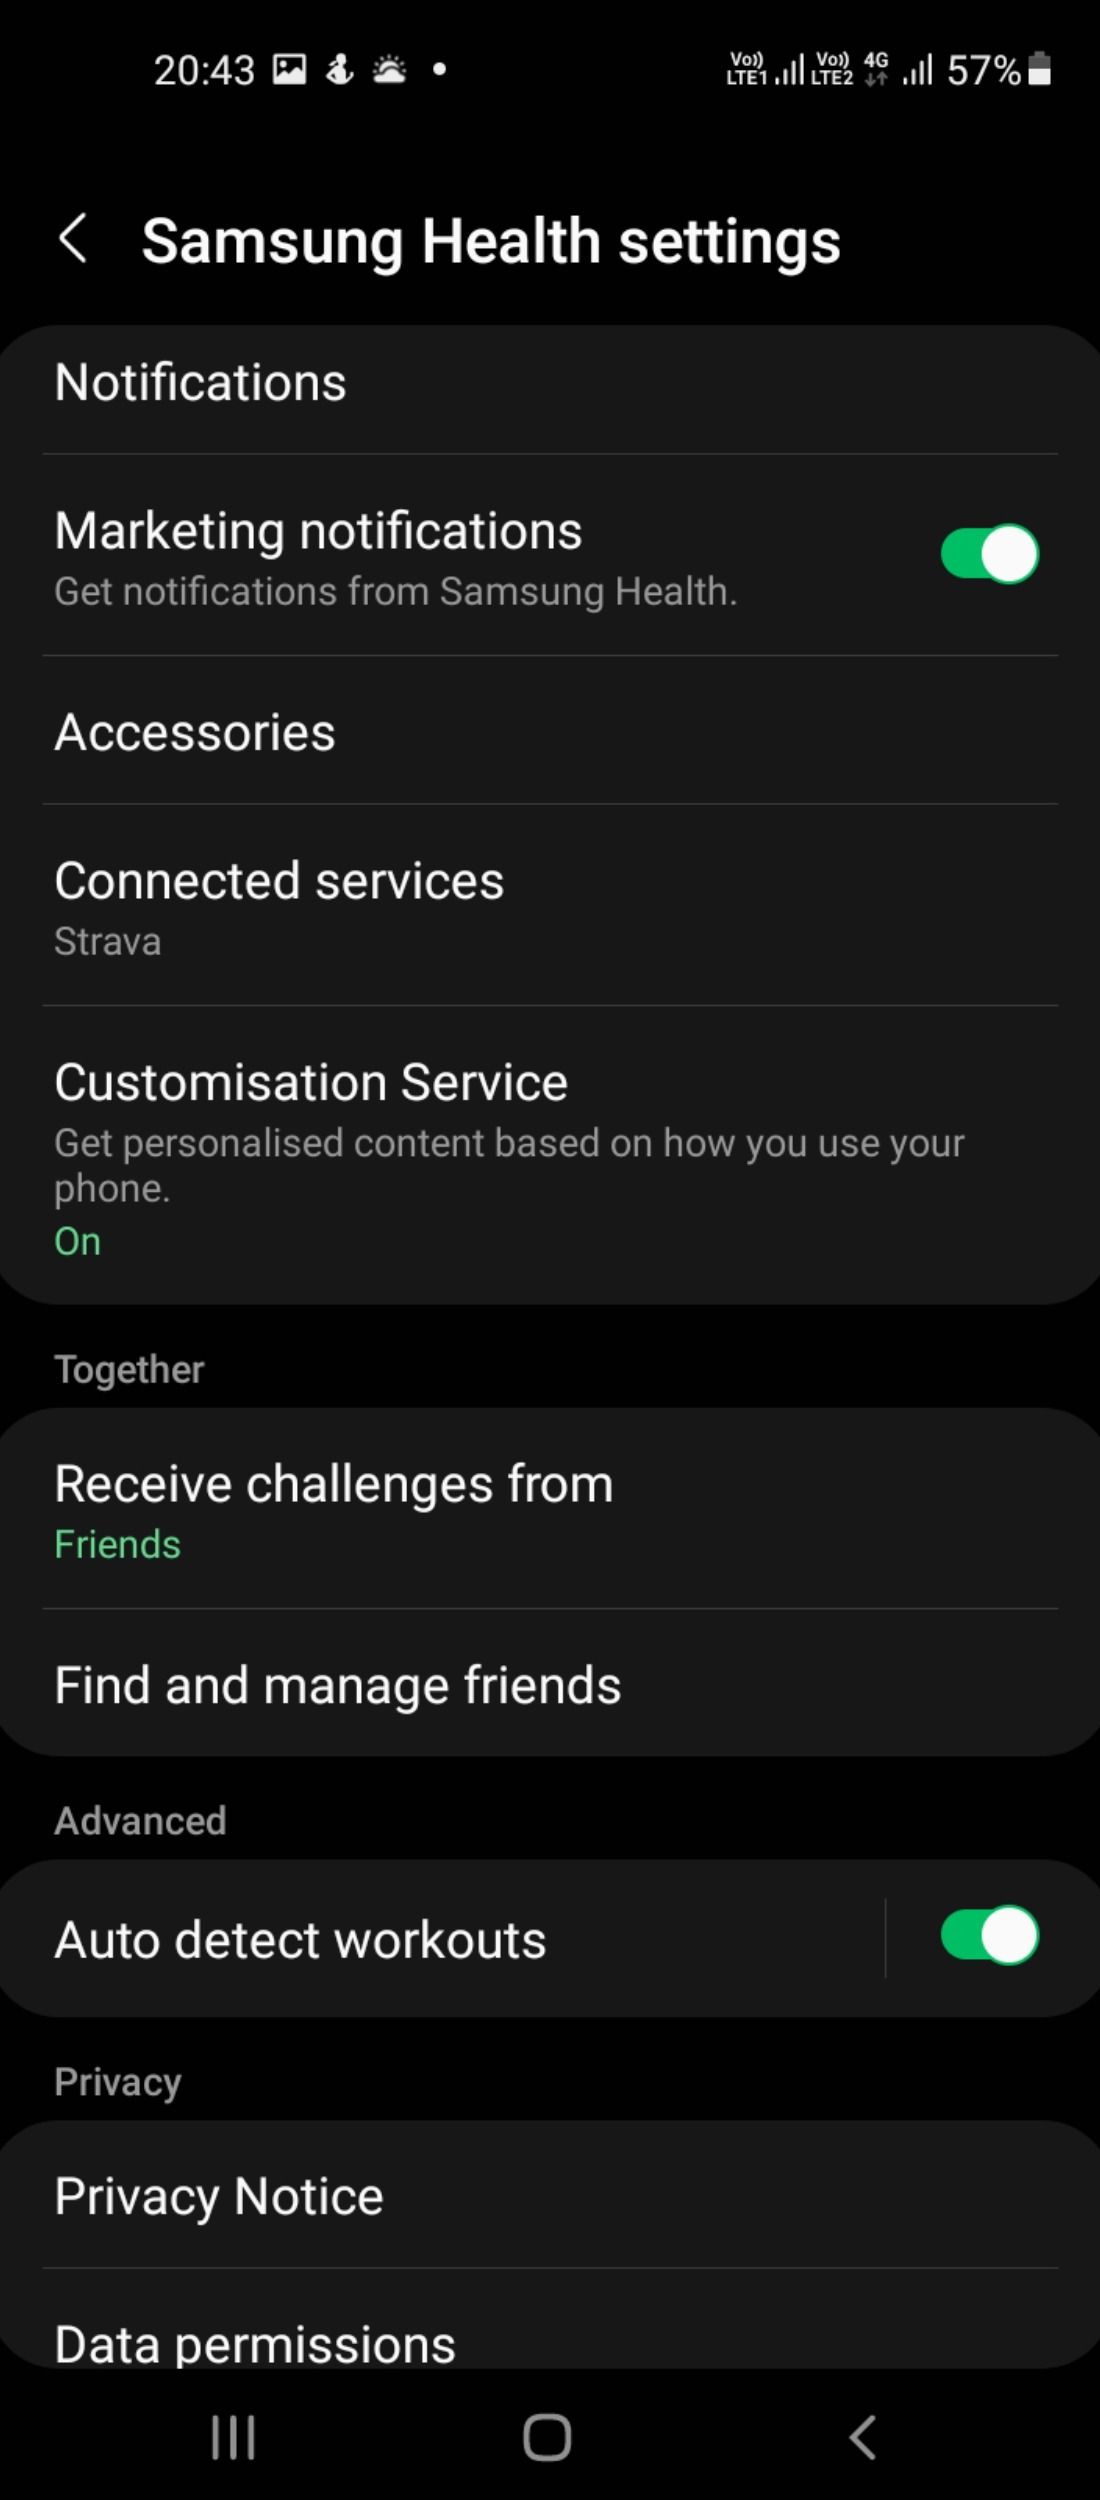 Connected services in Samsung Health